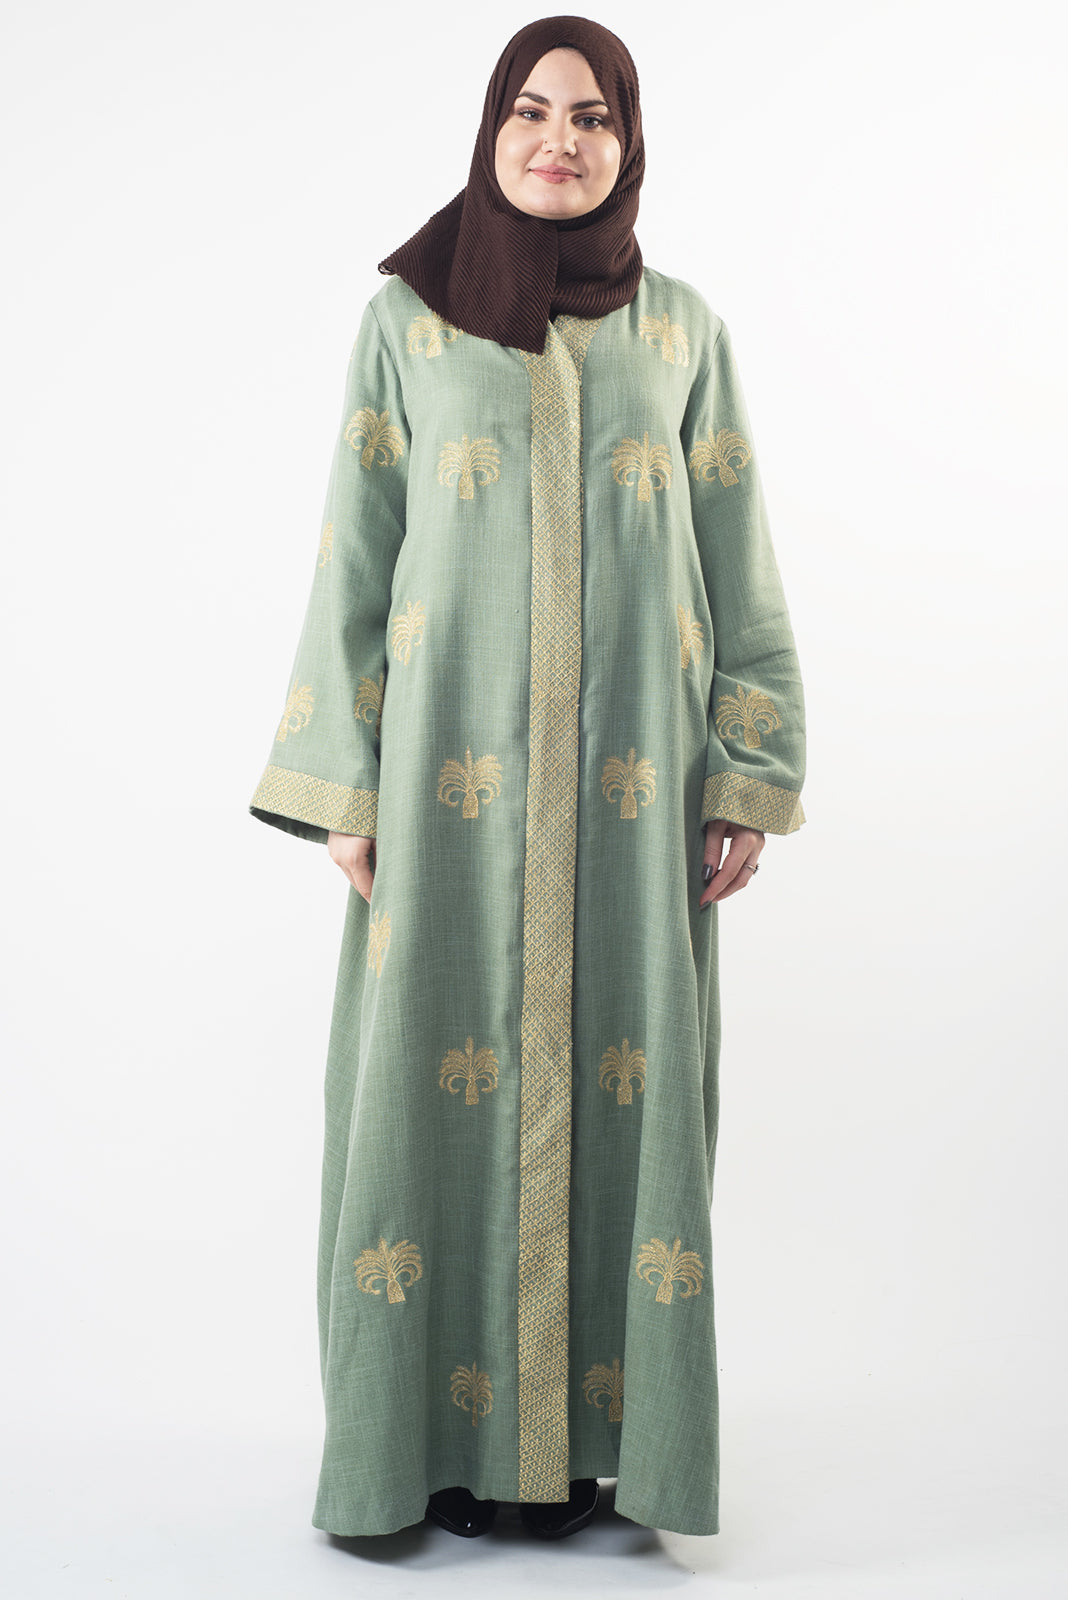 Palm Tree Gold Embroidered Mint Green Abaya